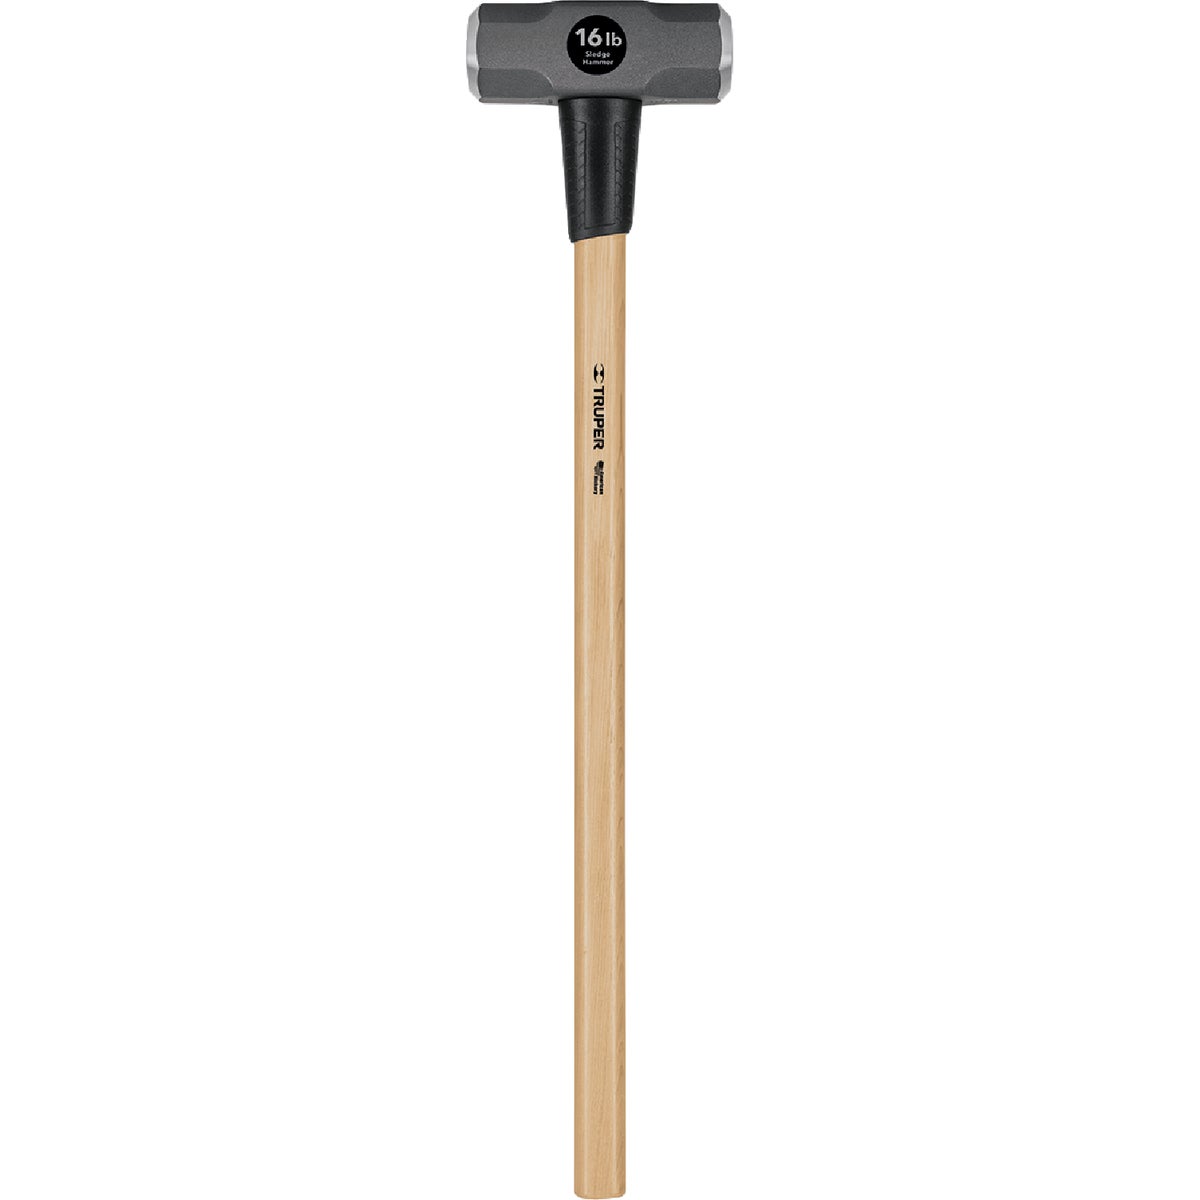 Truper 16 Lb. Double-Faced Sledge Hammer with 36 In. Hickory Handle